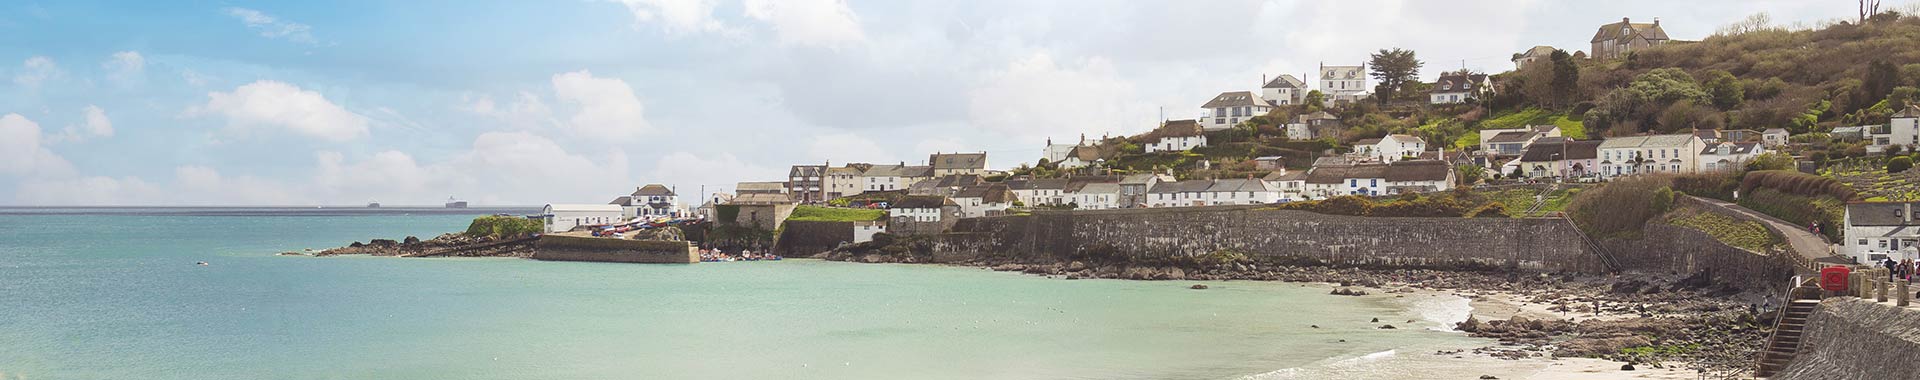 Coverack Cottages